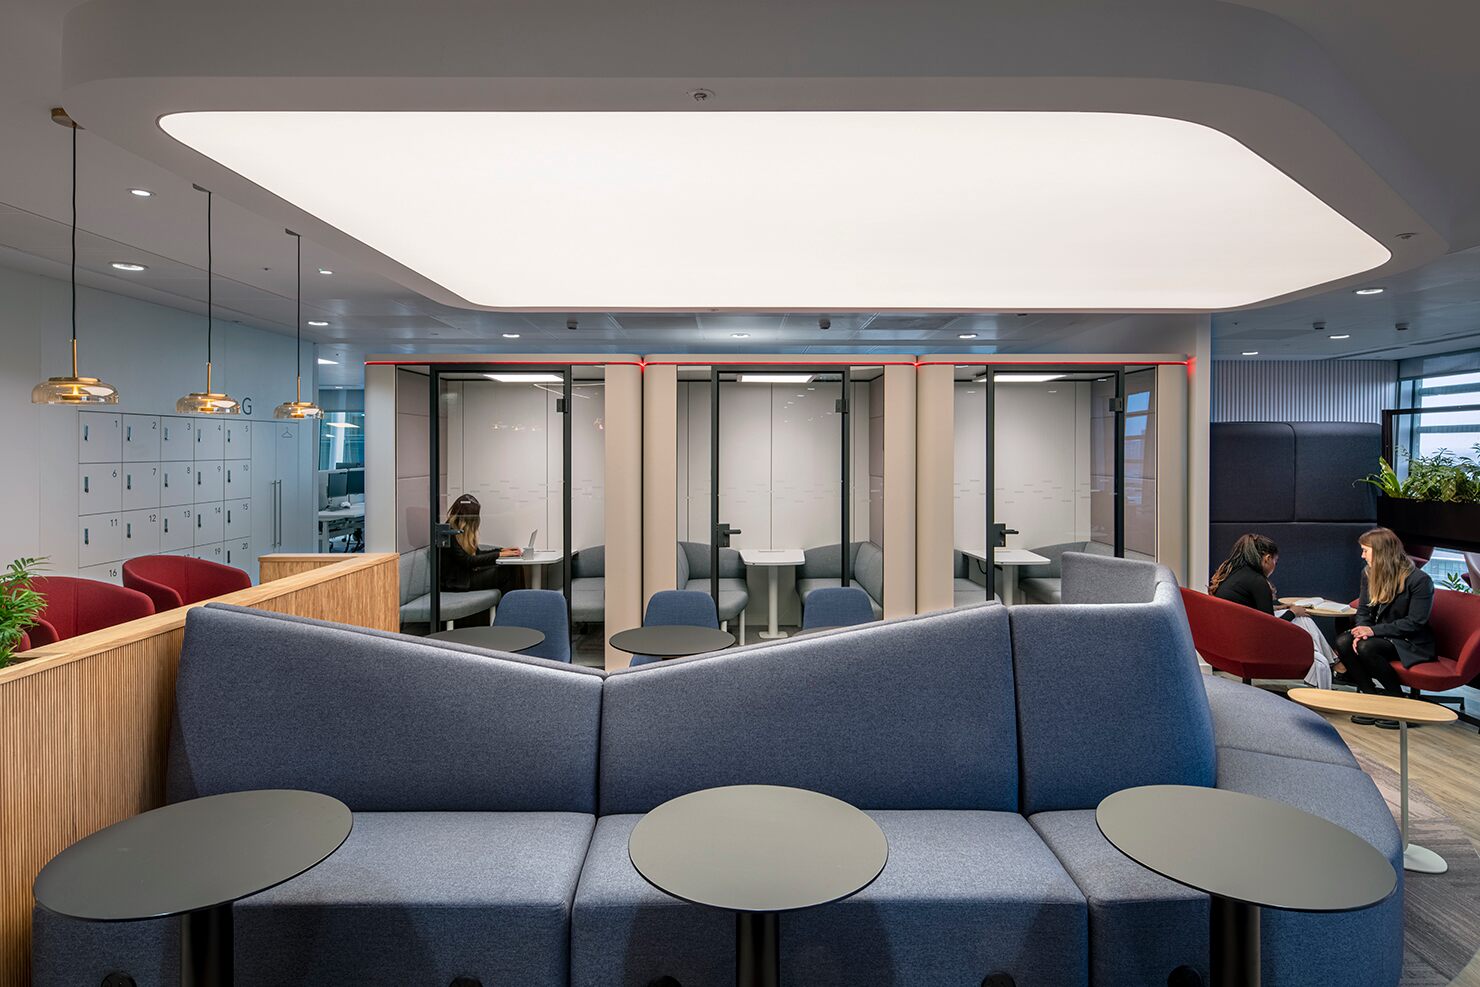 Sedus se:cube enclosed pods support quiet work in the lounge spaces at this insurance company